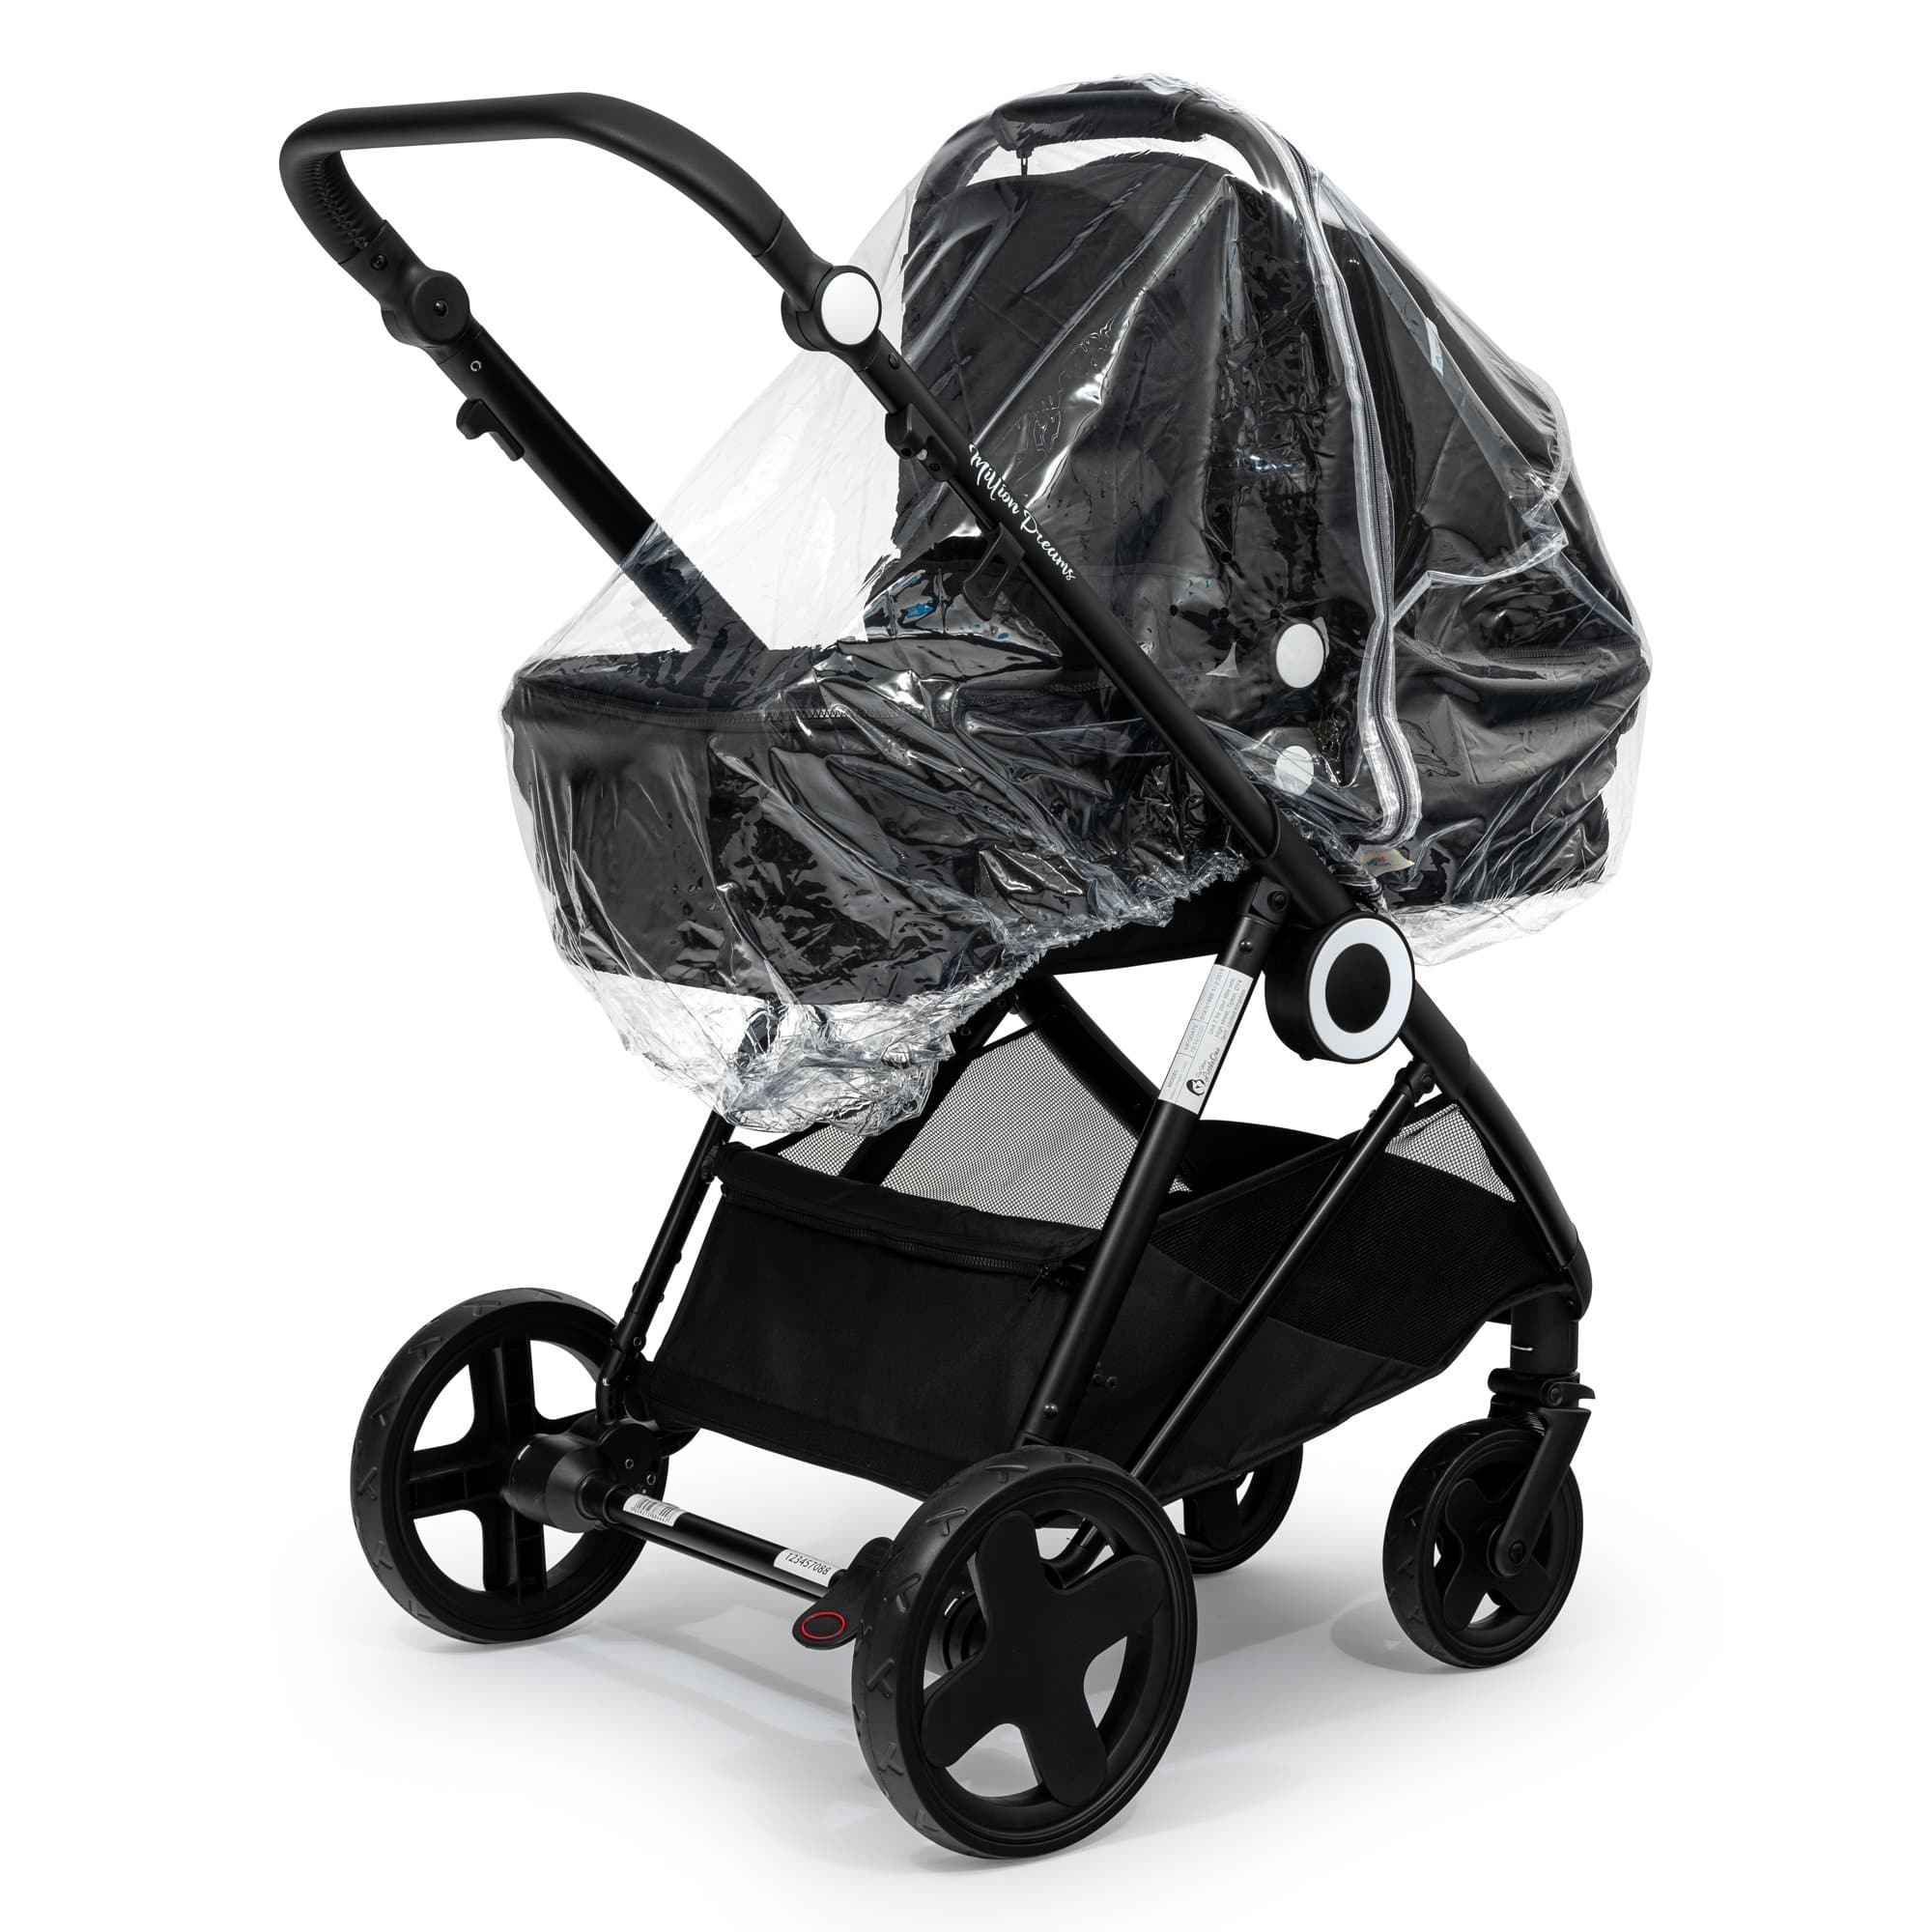 2 in 1 Rain Cover Compatible with Inglesina - Fits All Models - For Your Little One